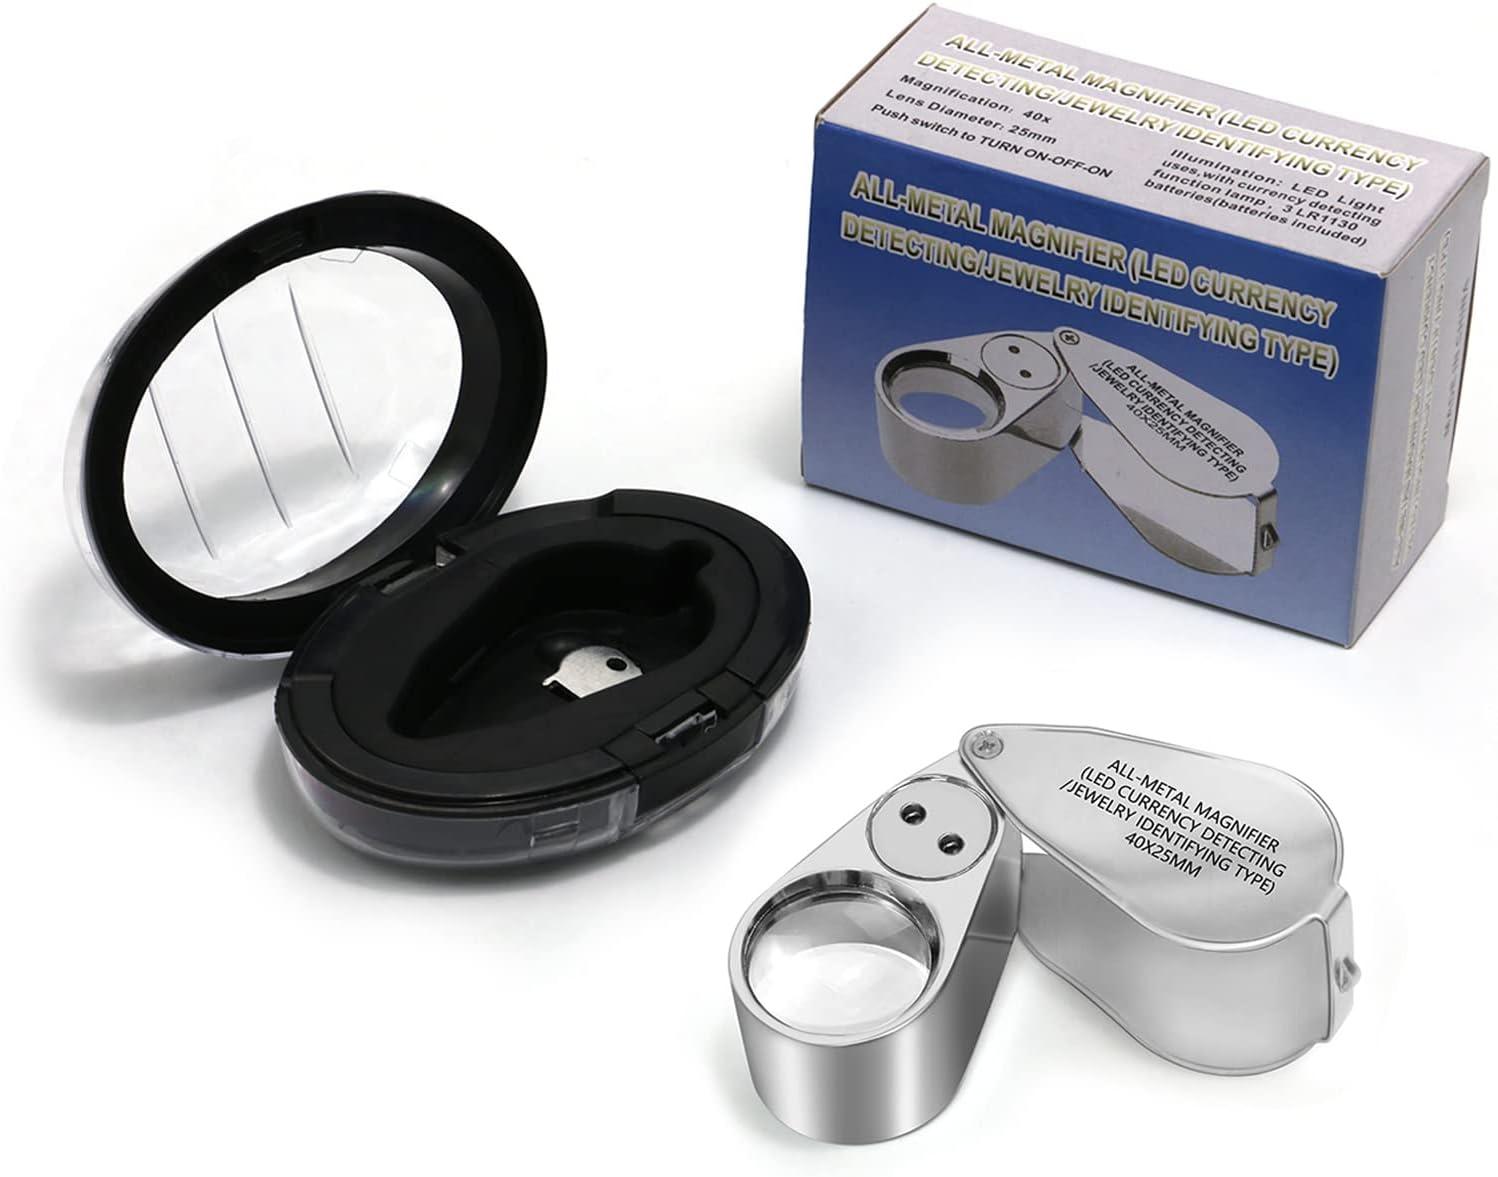  40 Magnification 25mm LED Jeweler Loupe Magnifying